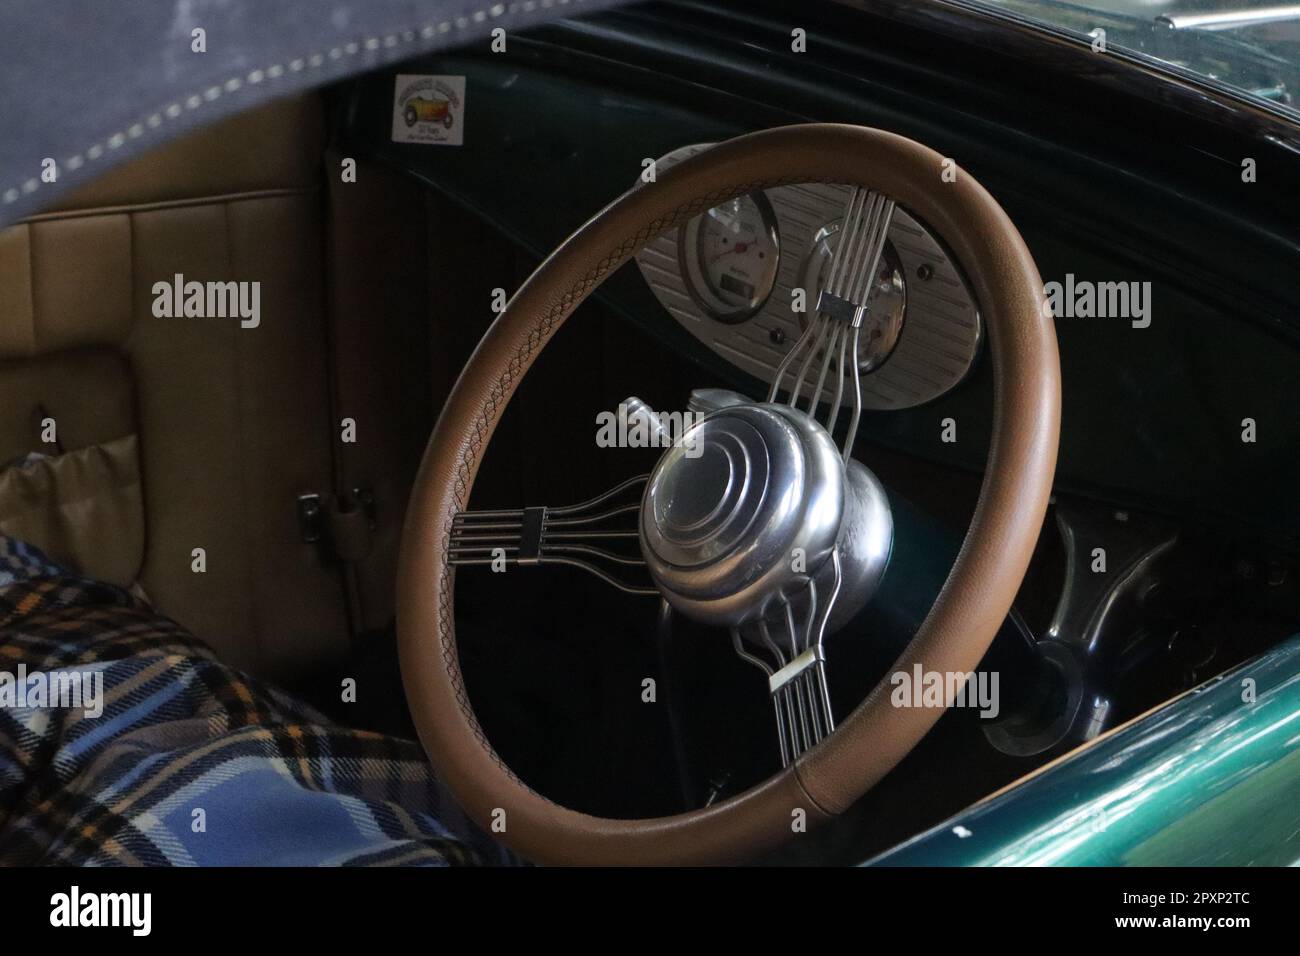 A classic car steering wheel featuring a wooden-like grip Stock Photo